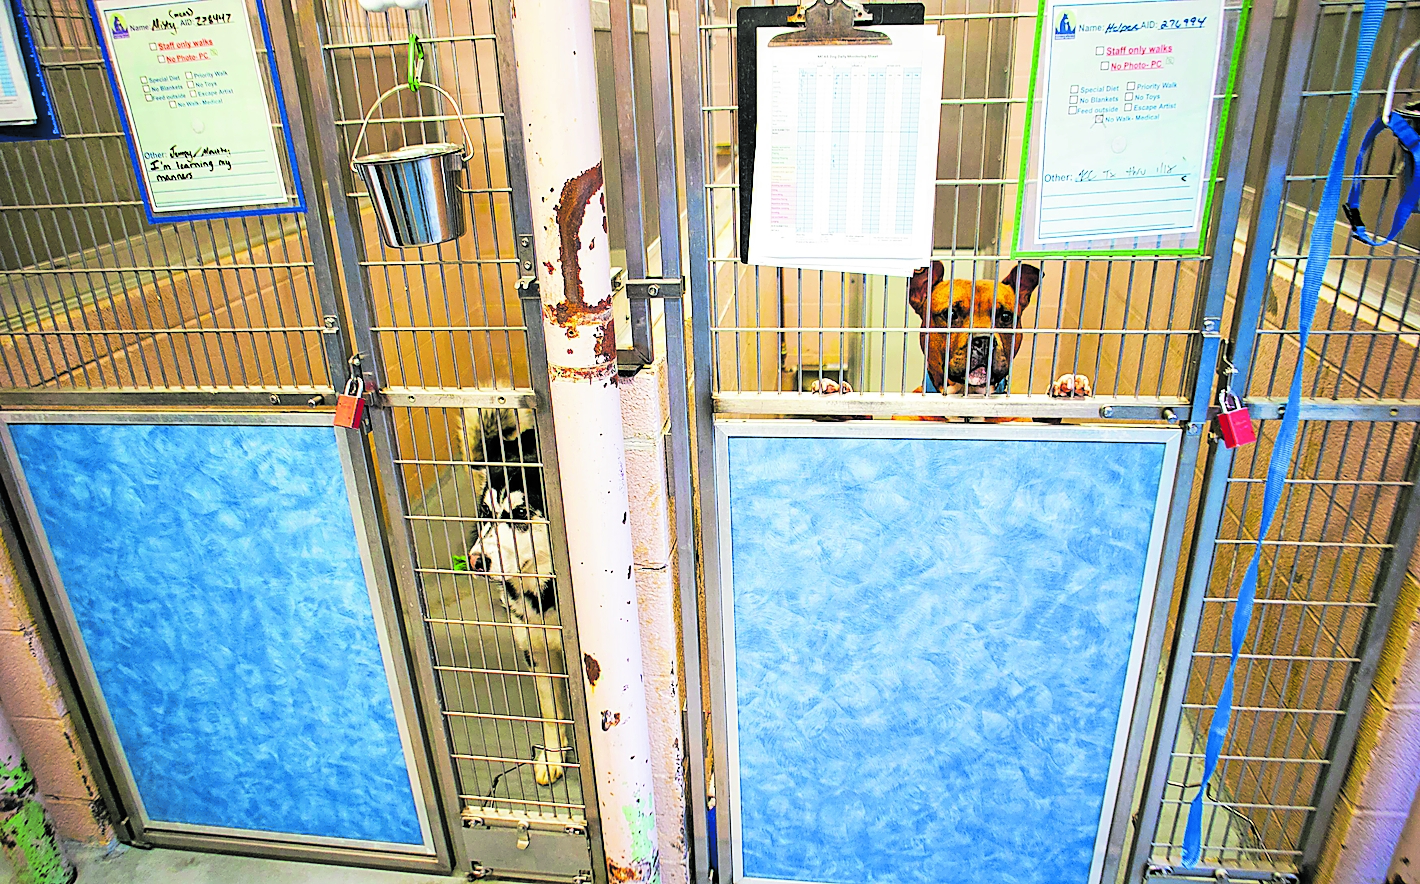 Multnomah County animal shelter needs a system of accountability, not another review